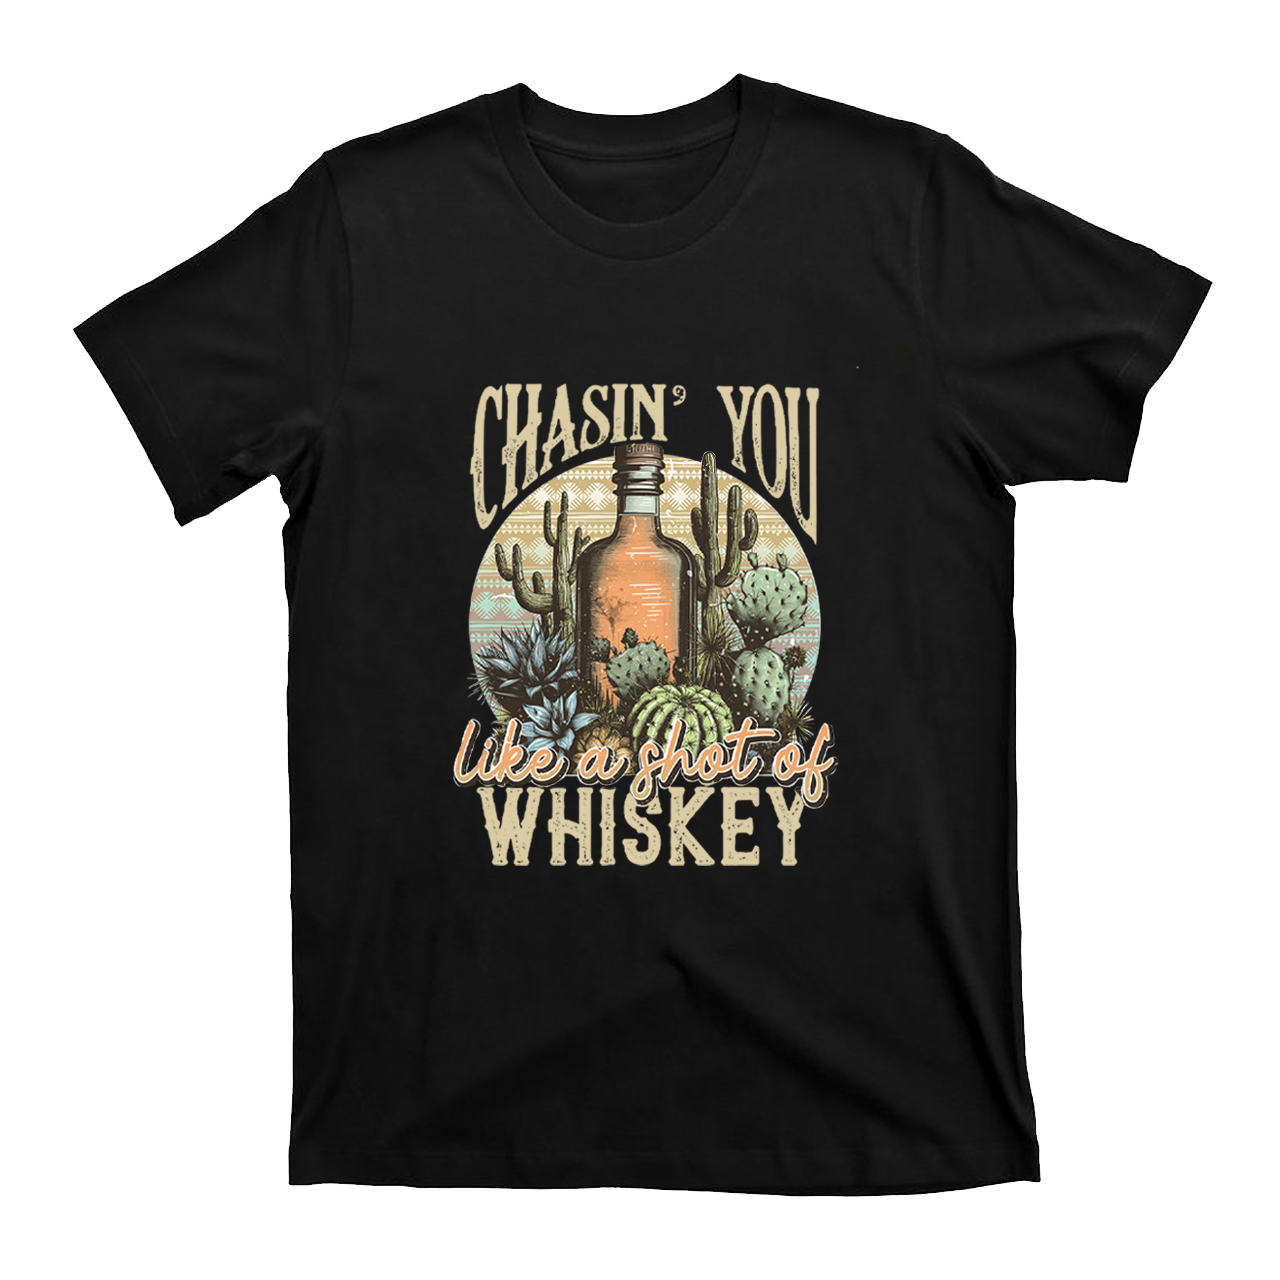 Chasin' You Like a Shot of Whiskey T-Shirts